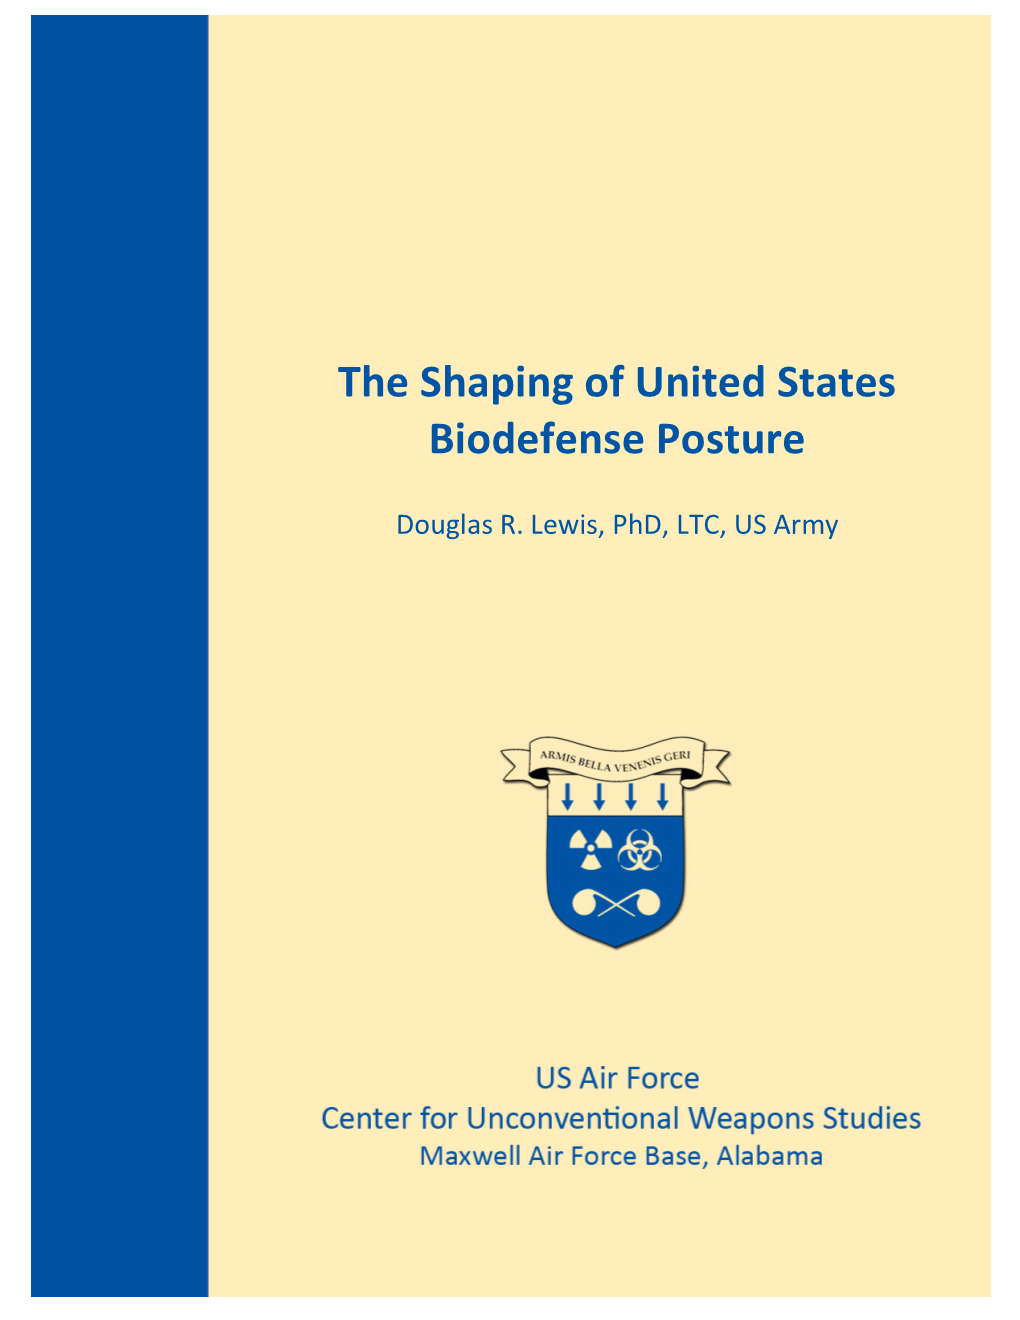 The Shaping of United States Biodefense Posture